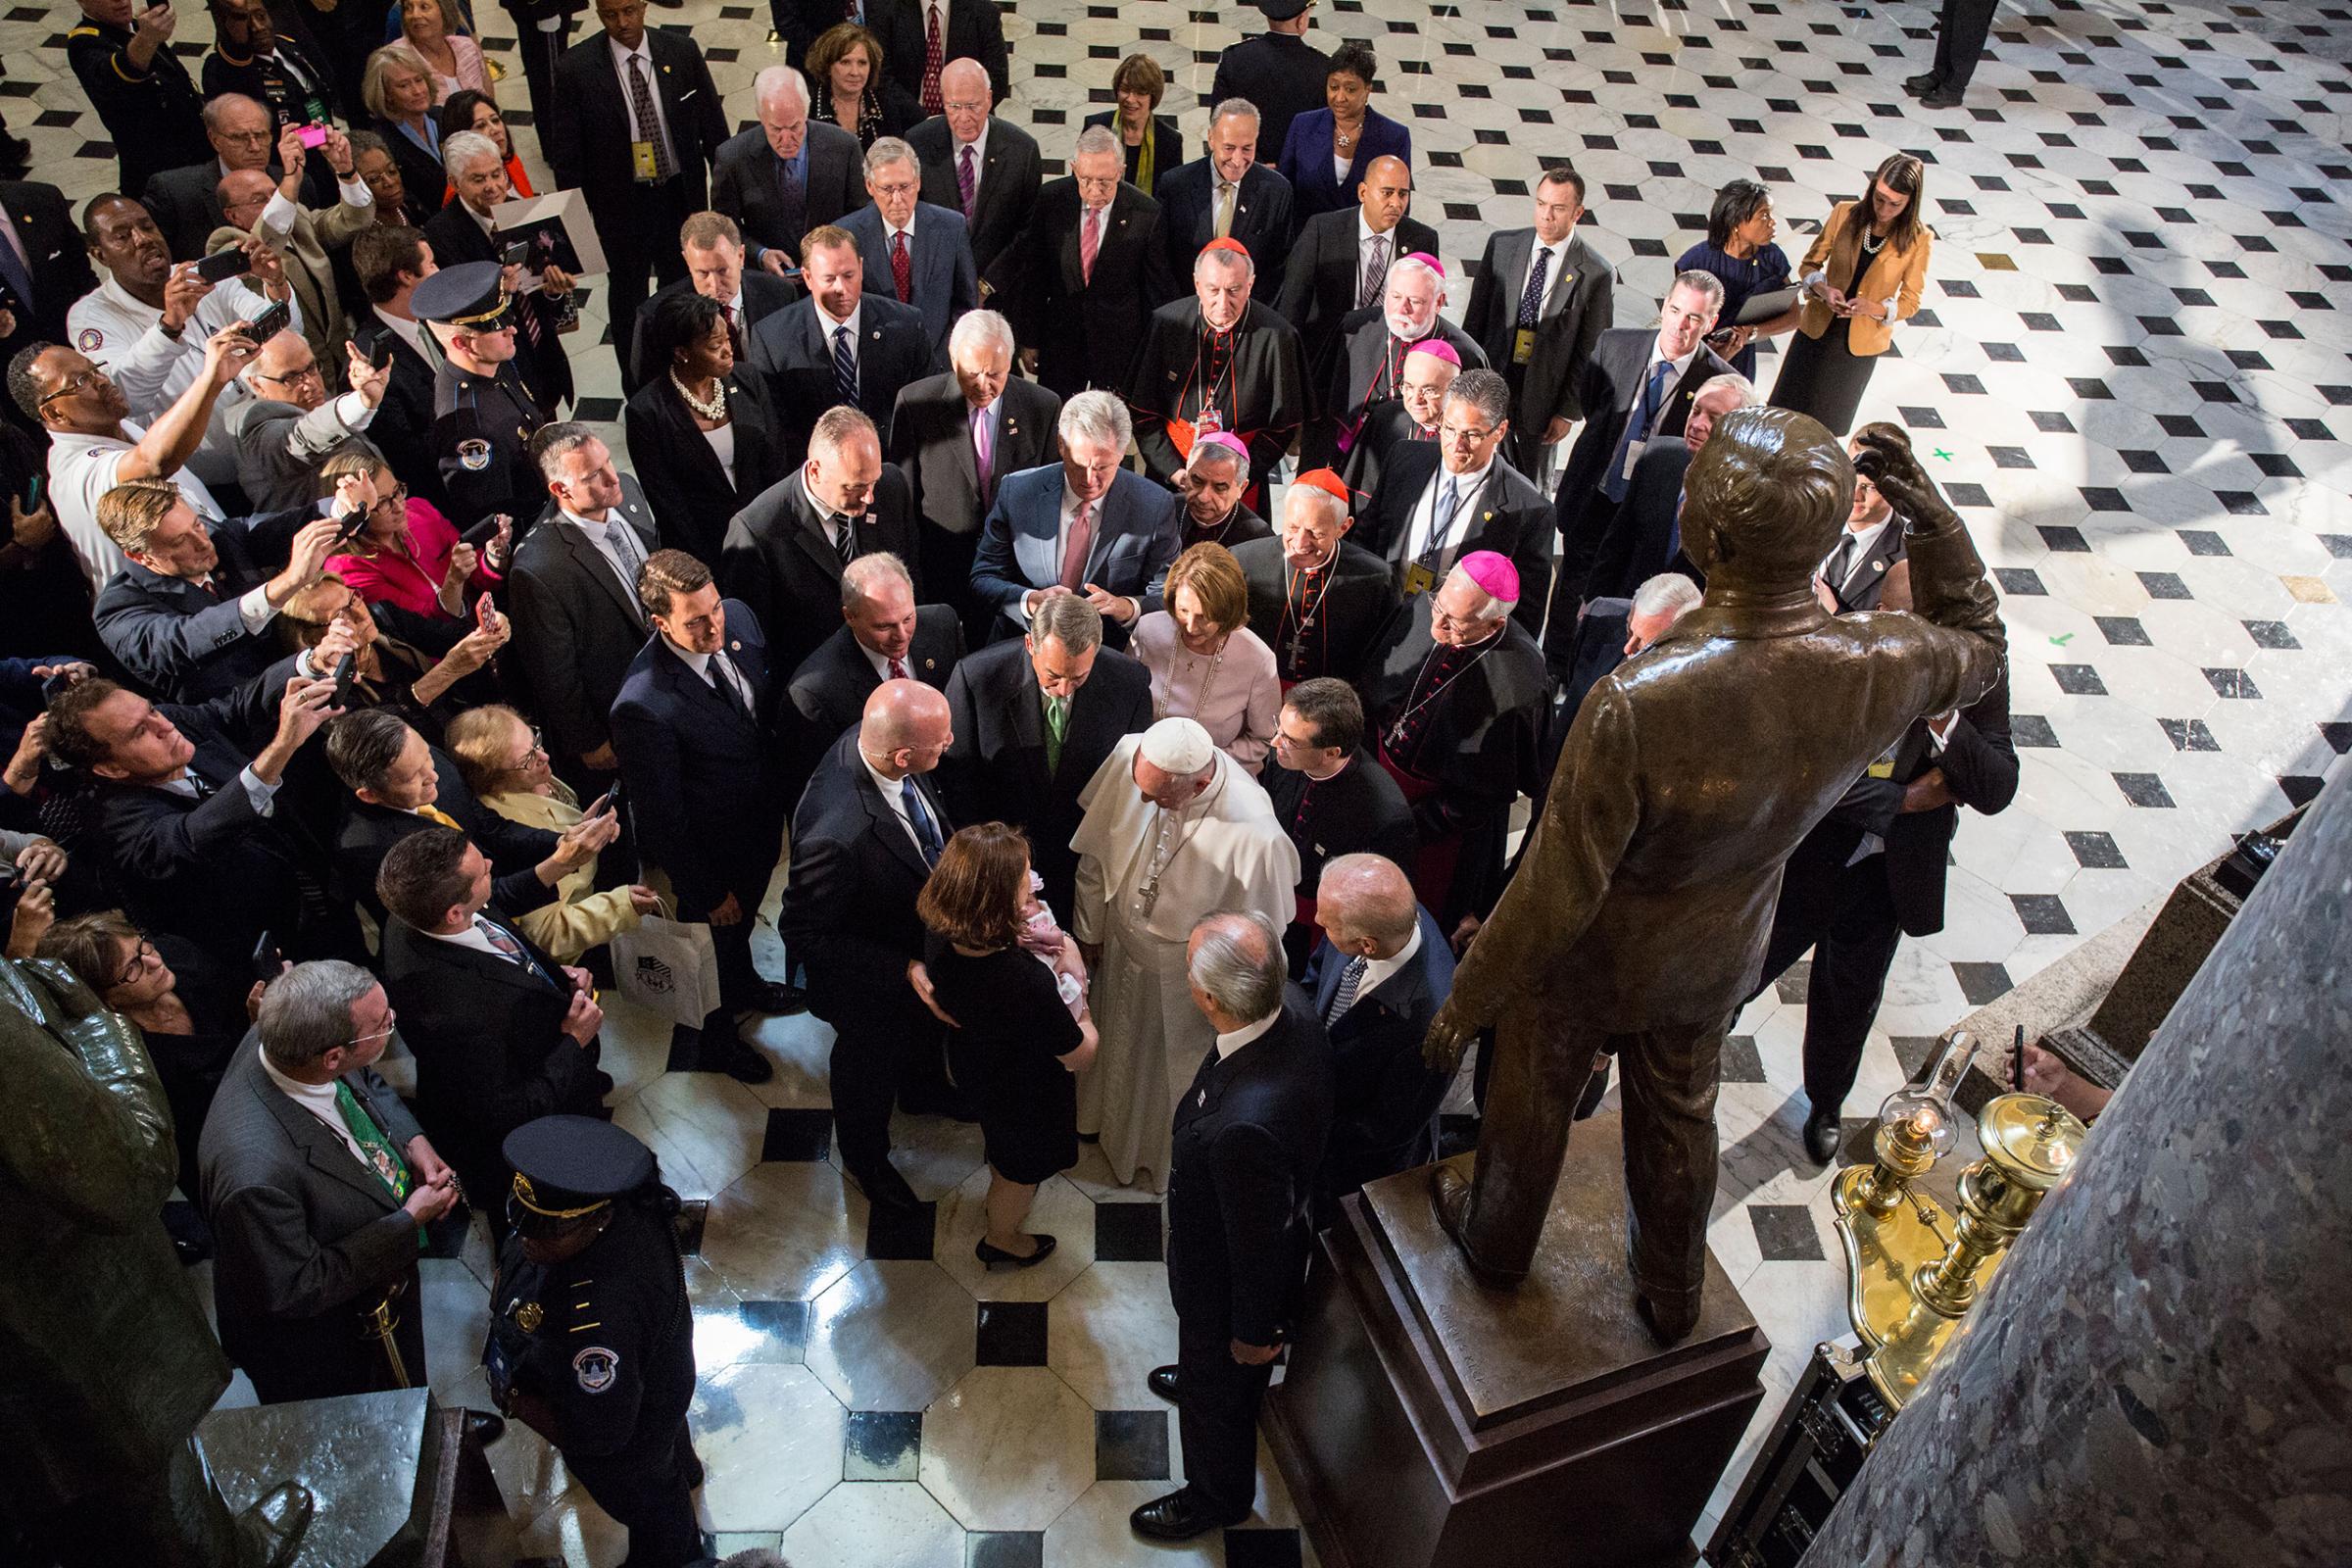 Pope Francis blesses an unidentified child in Statuary Hall at the U.S. Capitol in Washington DC, USA, 24 September 2015. Photograph by Tobias Hutzler for TIME